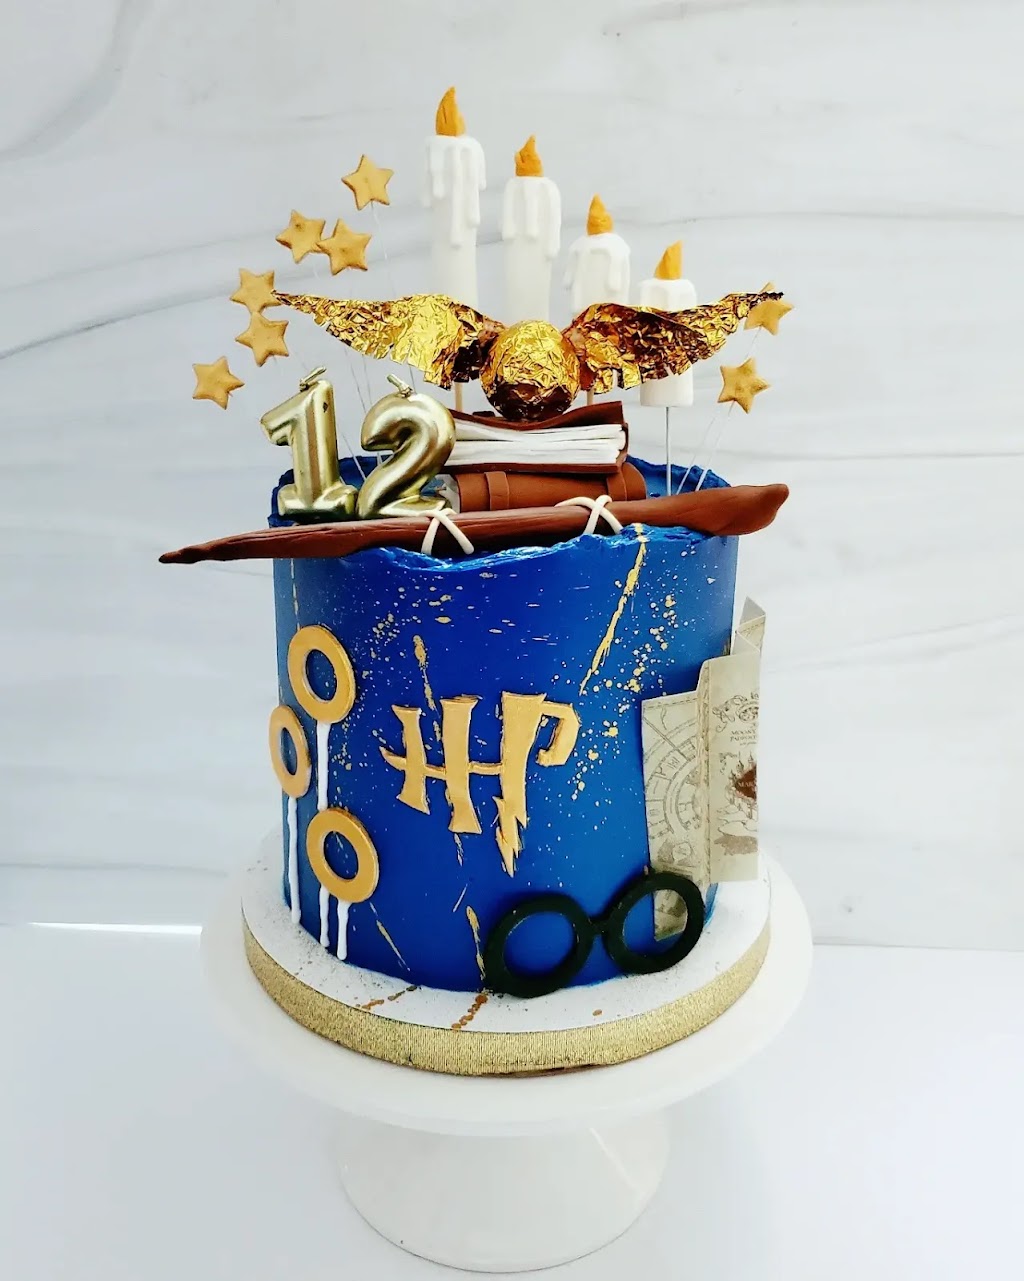 Sweet Luxe Cake Design | By Appointment Only, Blairstown, NJ 07825 | Phone: (973) 897-3595